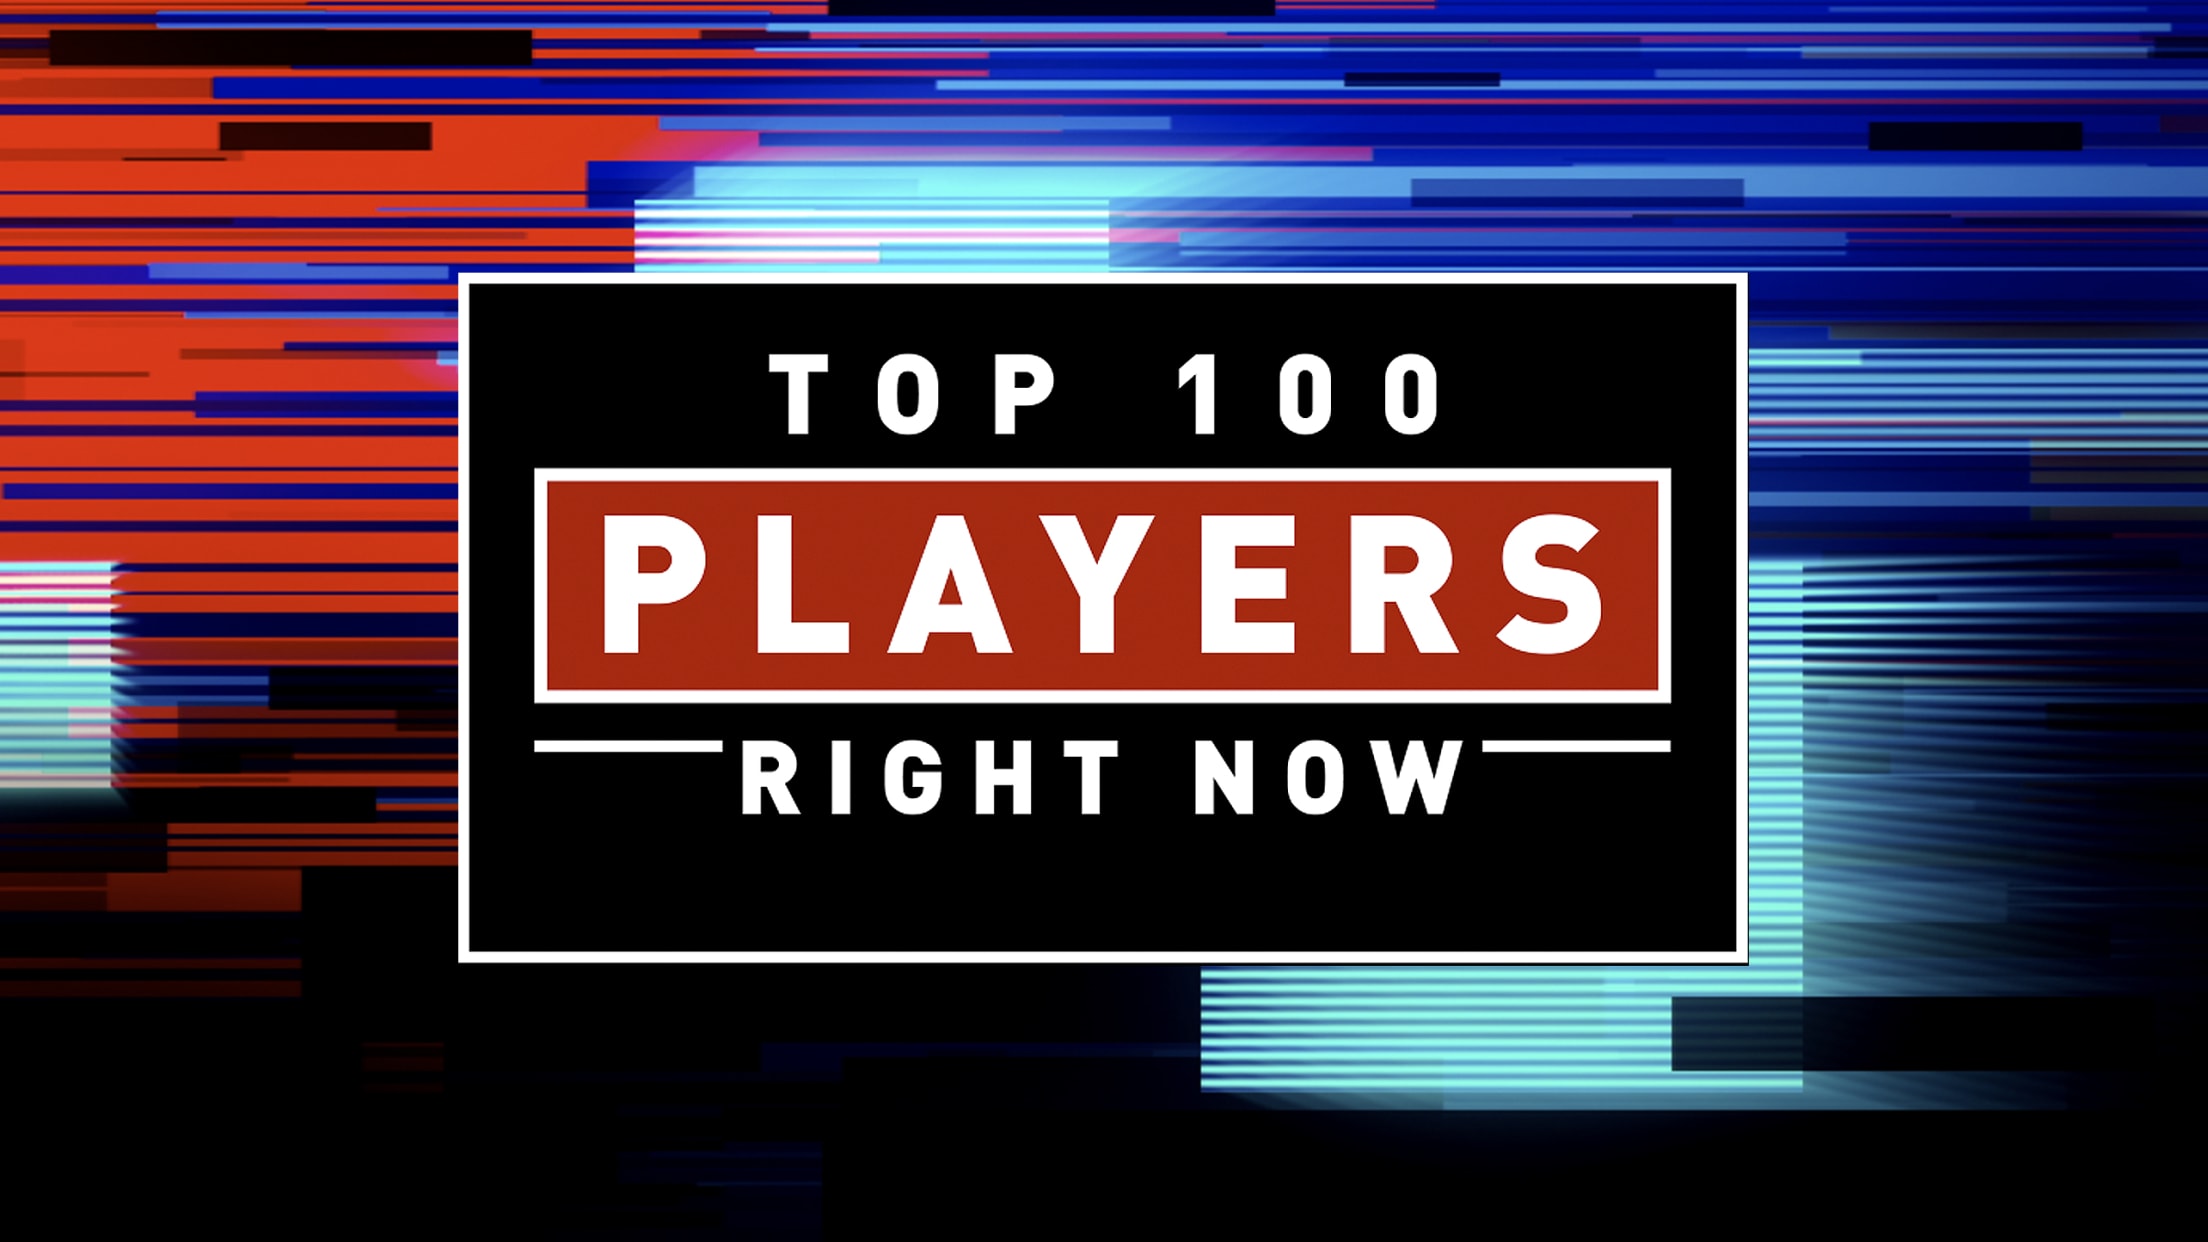 Top 100 Right Now! MLB Network